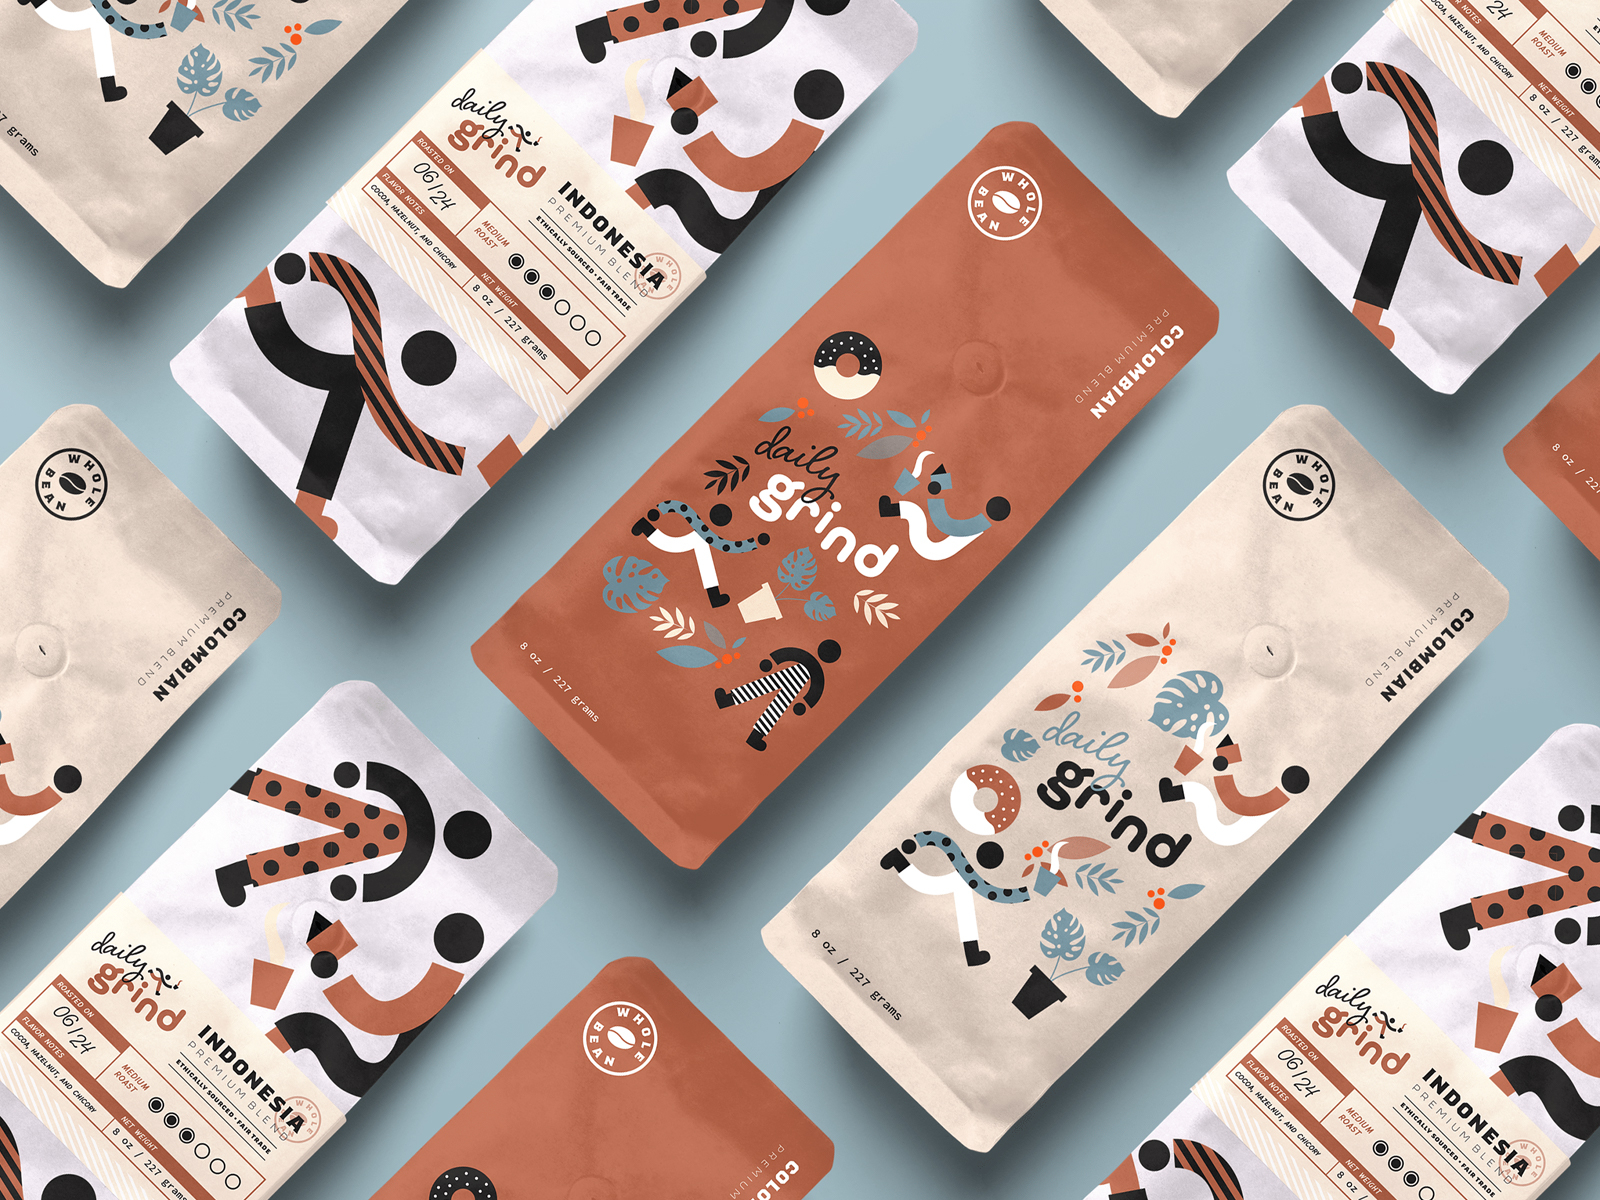 Download Free Coffee Bags Mockups by Mr.Mockup™ on Dribbble